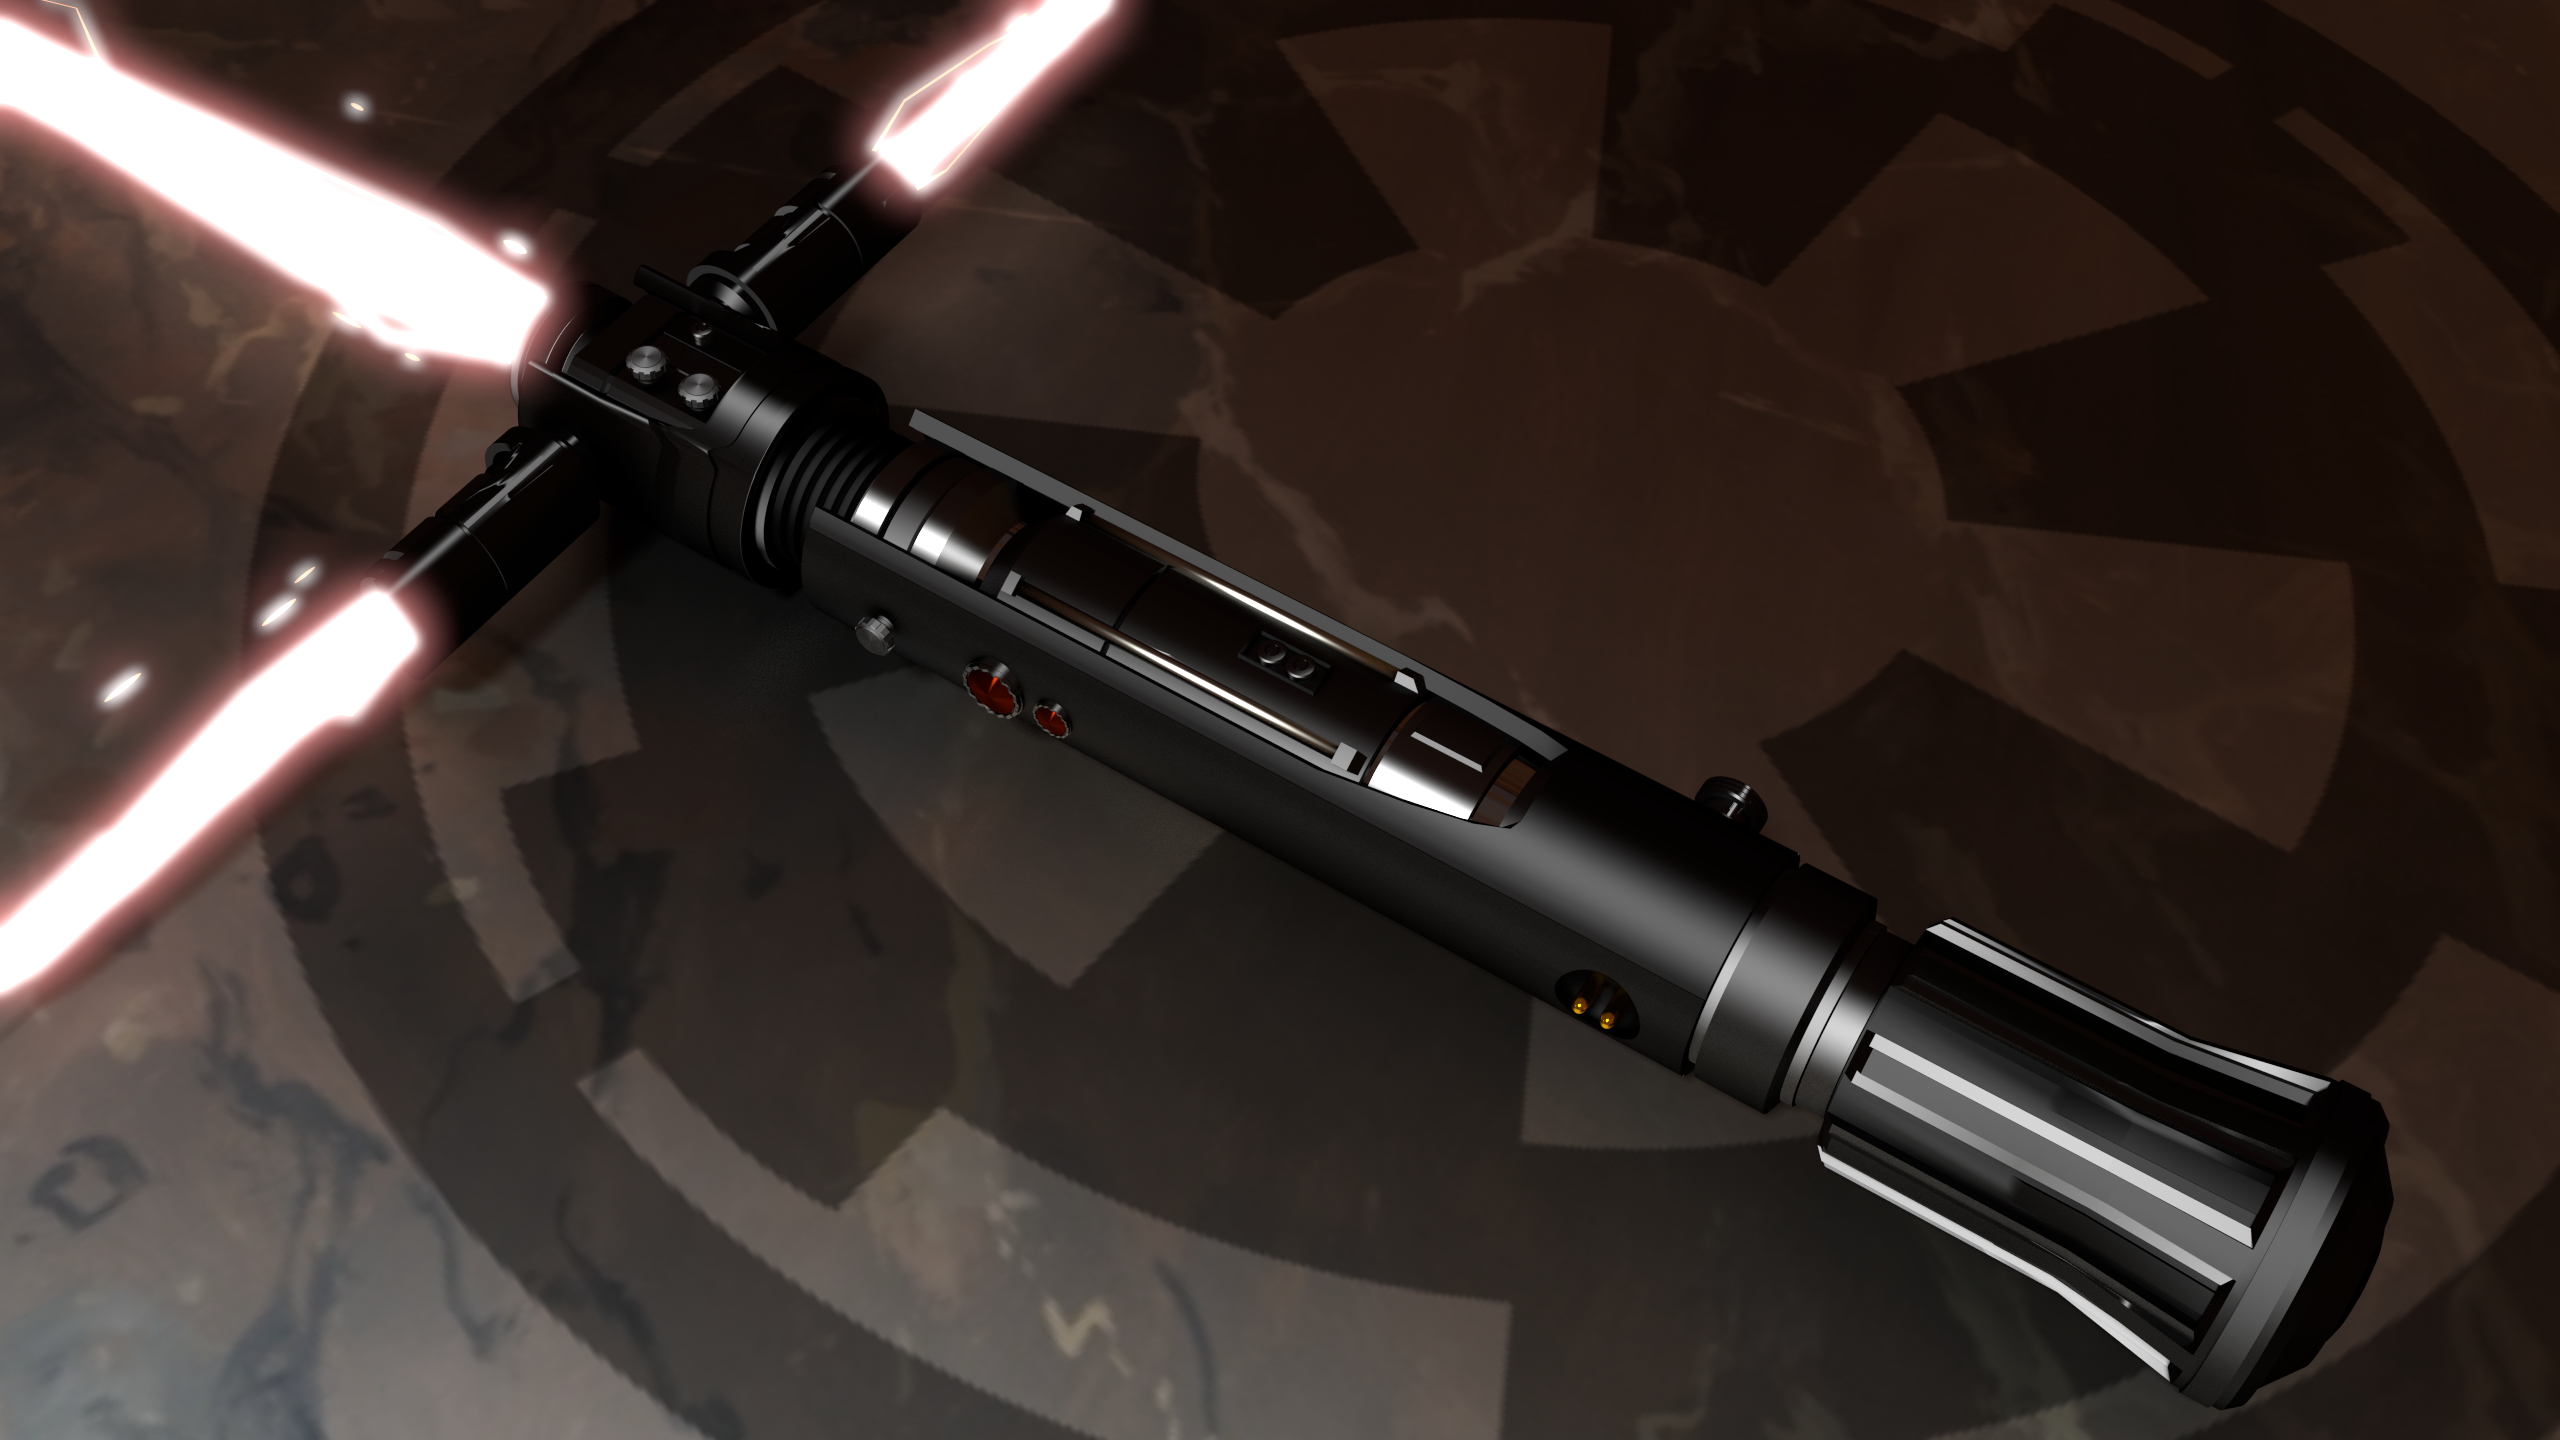 Lightsaber Kylo Ren The Force Awakens by TheHatter 10 6 on